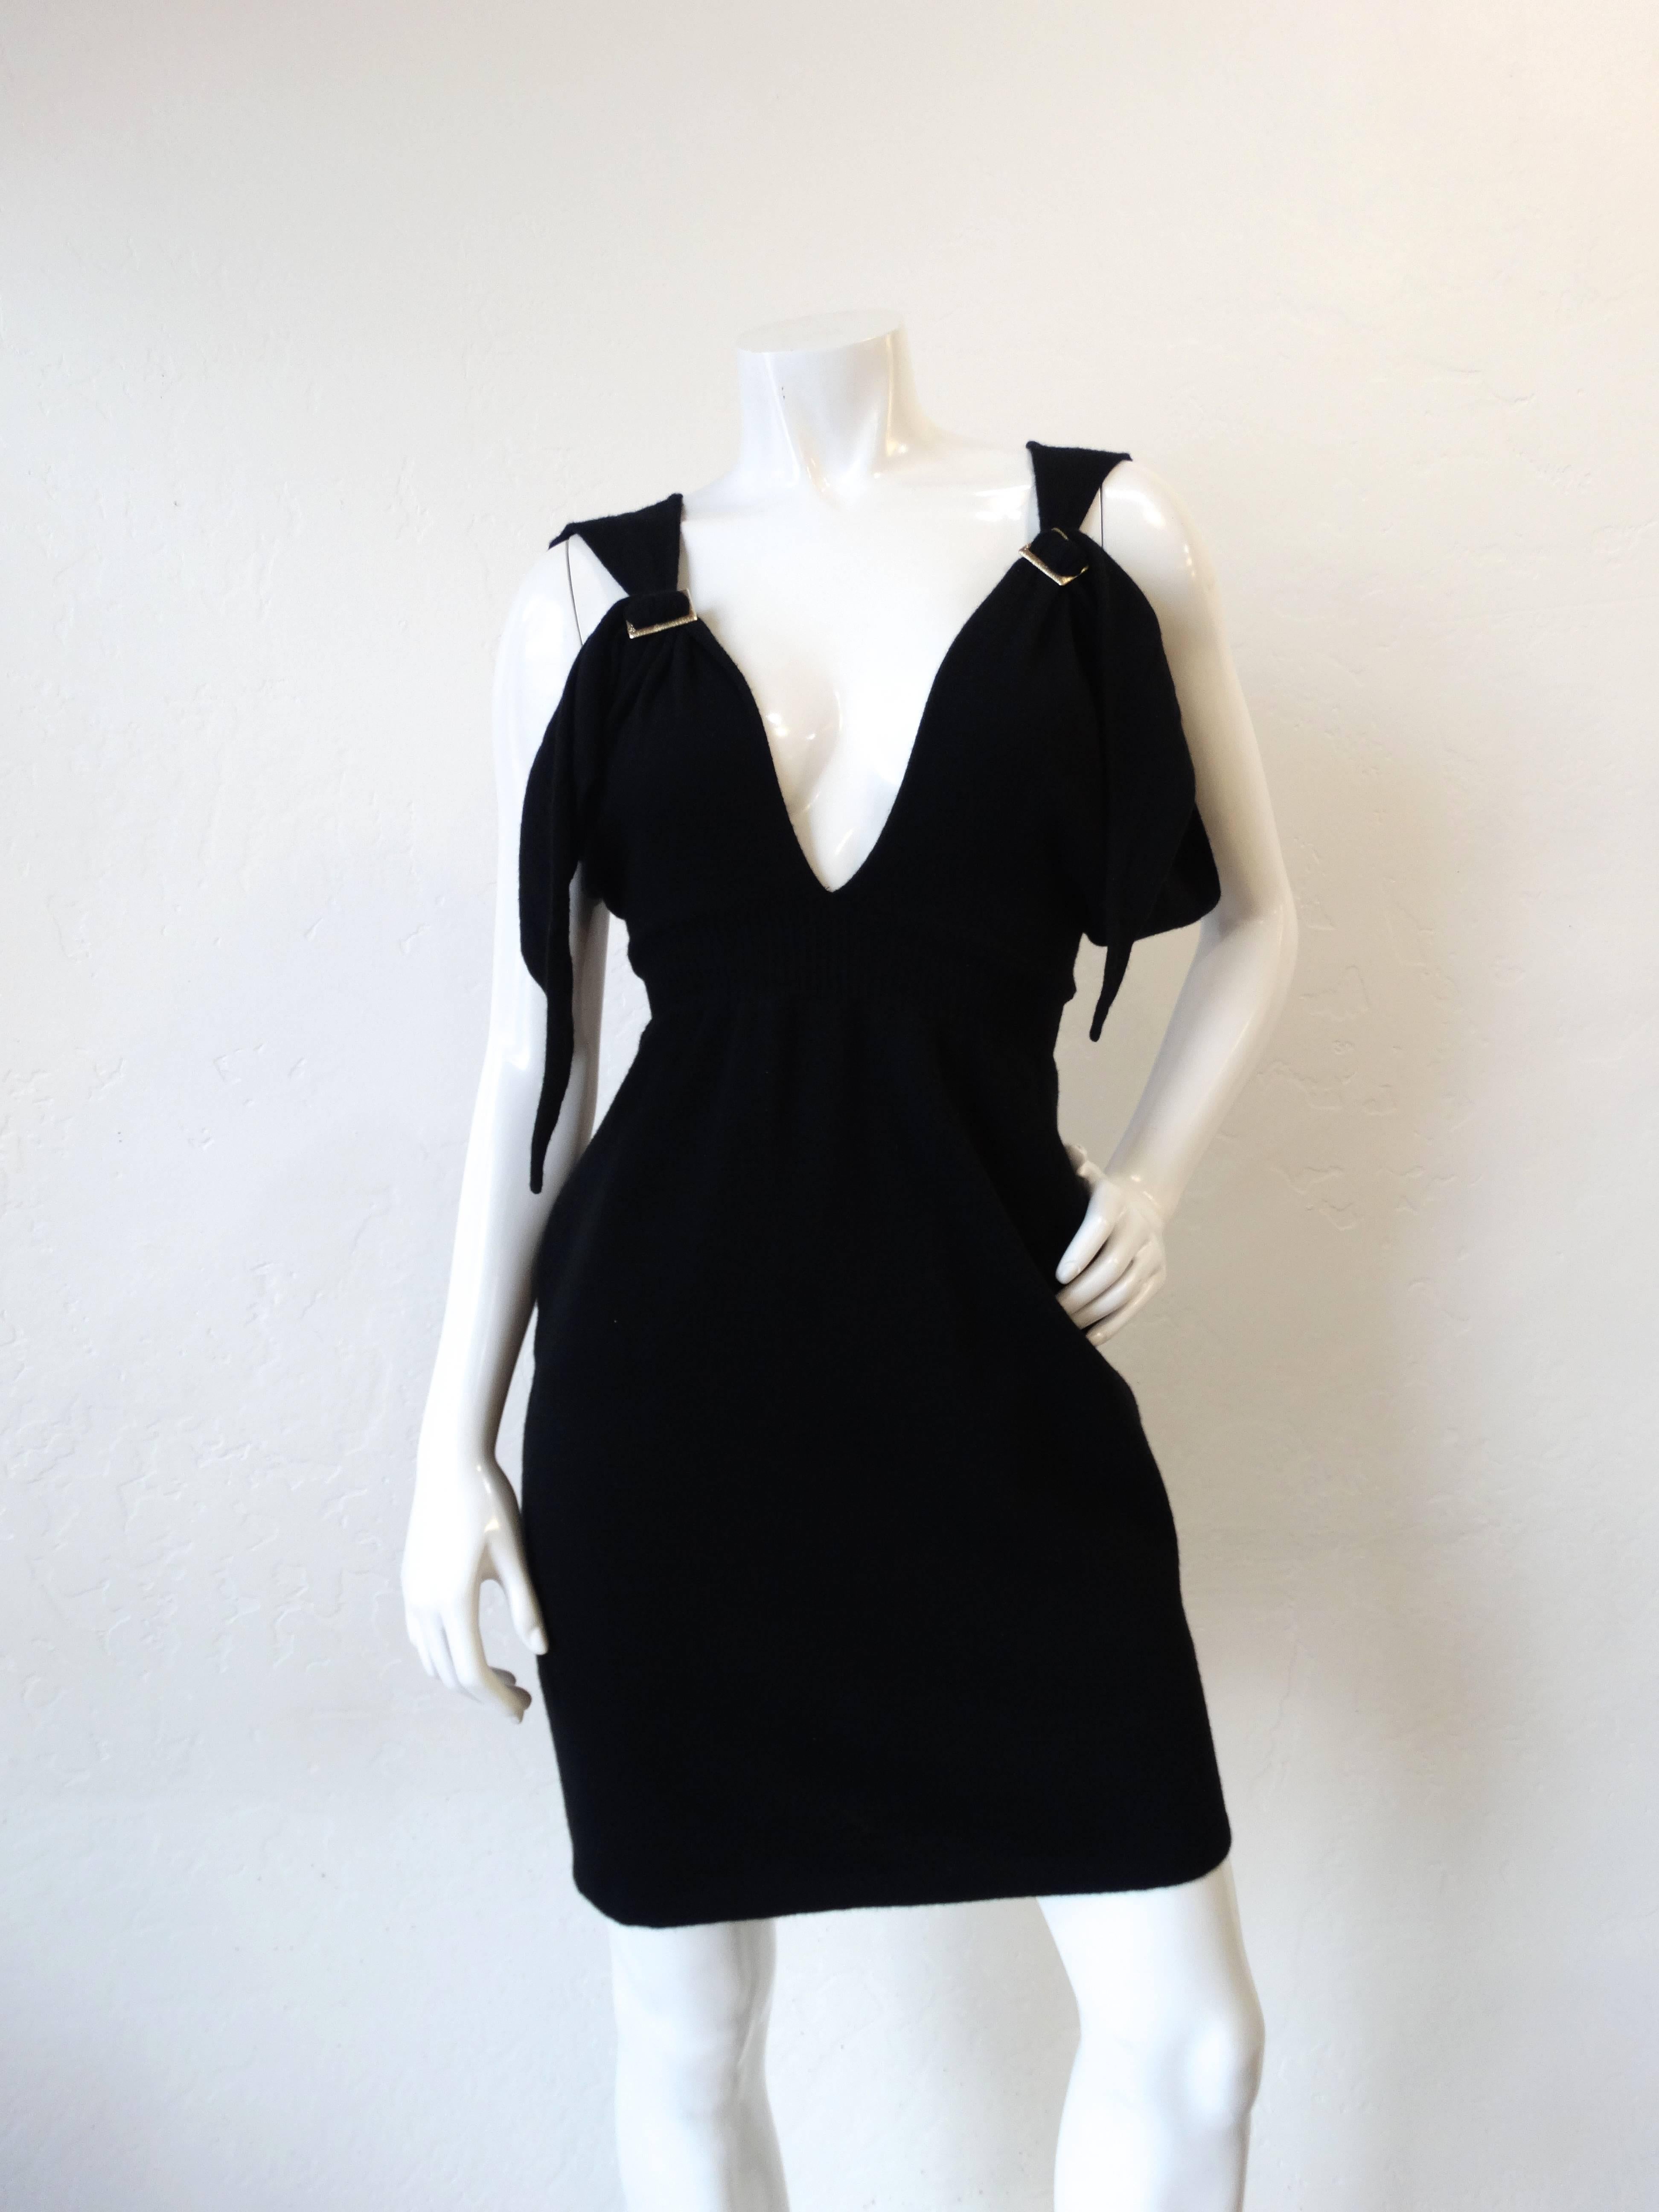 Classy meets sexy in our incredible knit Chanel dress from 2009! Solid black stretch knit mini dress with sexy plunge neckline. Two silver Chanel buckle details on either of the straps. Matching belt is adjustable for a perfectly cinched fit and is